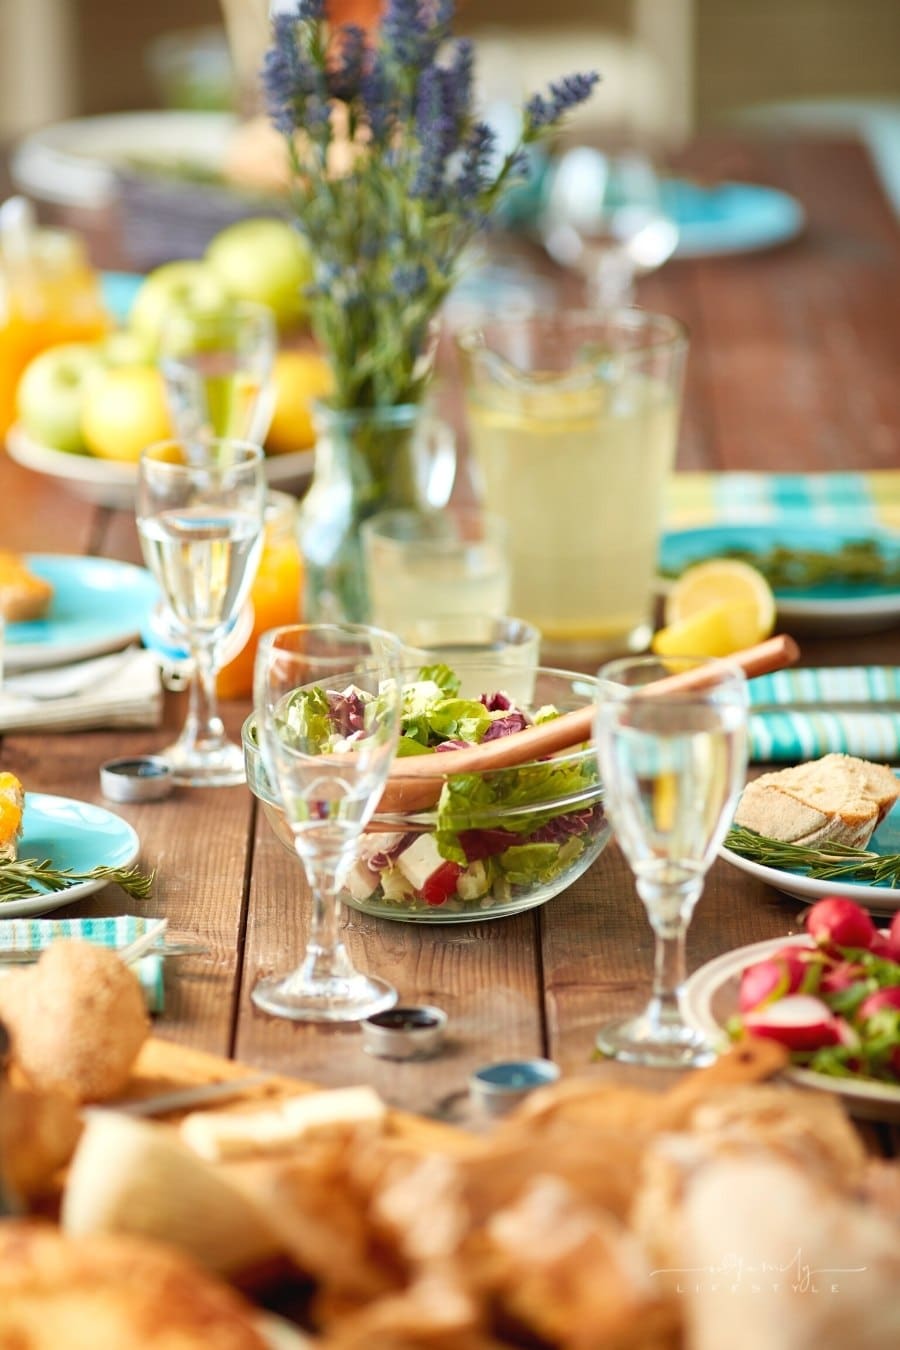 wooden table set with teal napkins and tableware with lemonade glasses